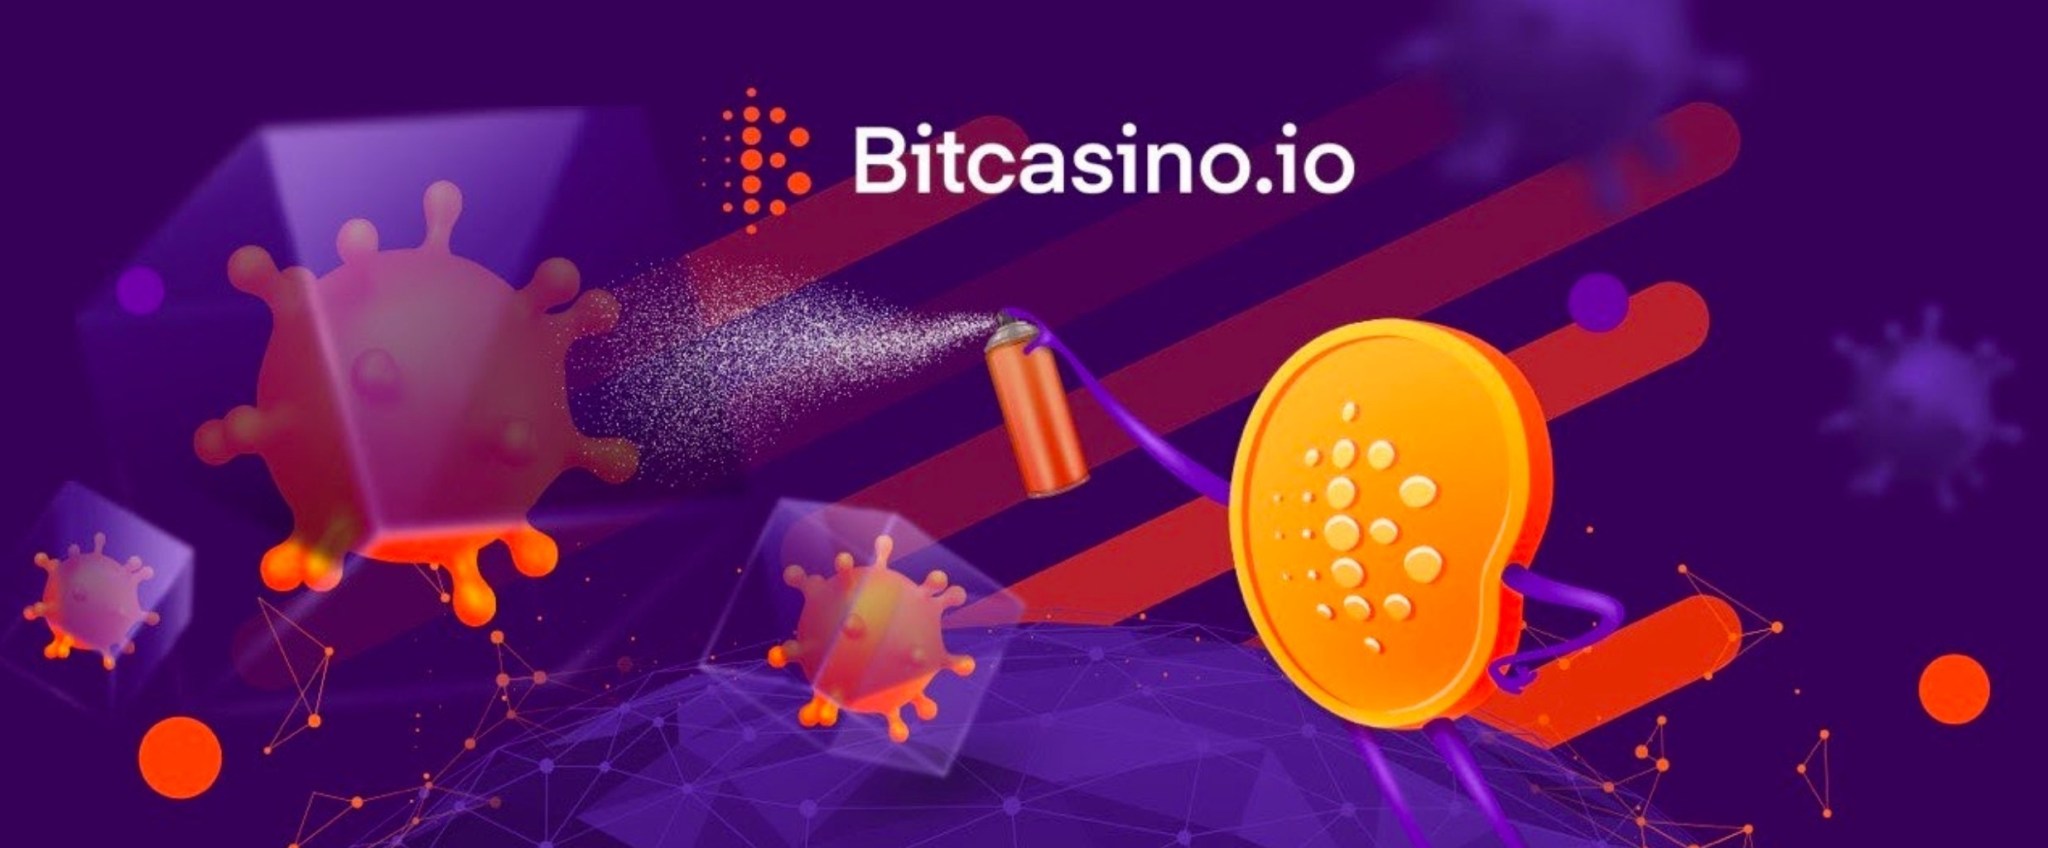 Bitcasino.io Raises 20BTC in Donations and Launches Charity Poker  Tournament to Support Pandemic Relief | Newswire